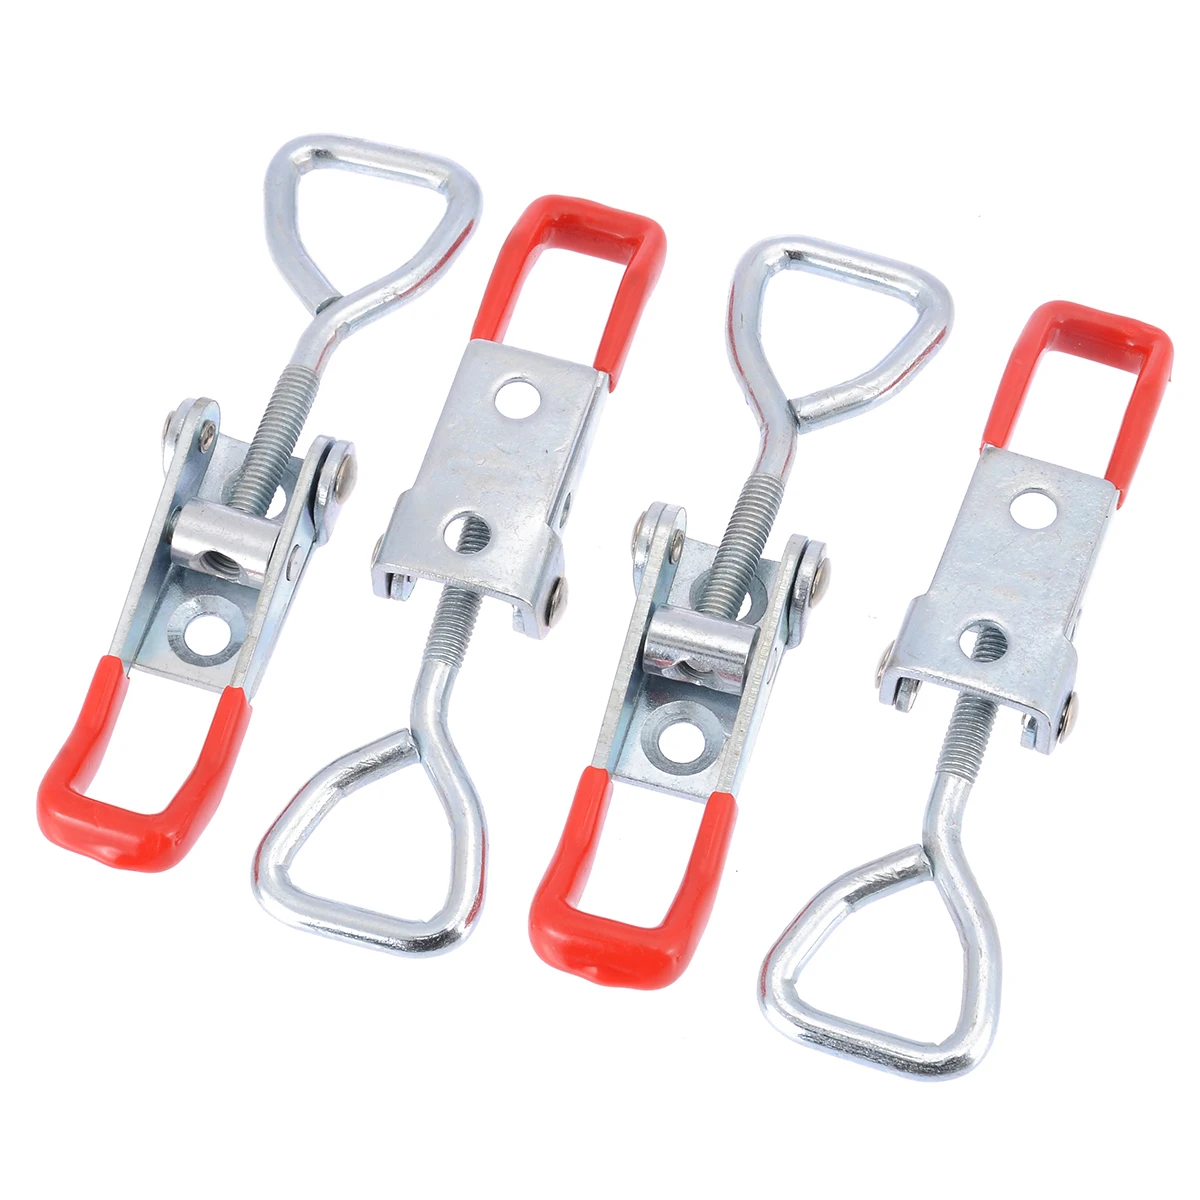 4PCS Adjustable Toggle Latch Catches Lock Spring Loaded Toggle Case Box Cabinet Box Lever Handle Clamp Hasp Hardware Furniture